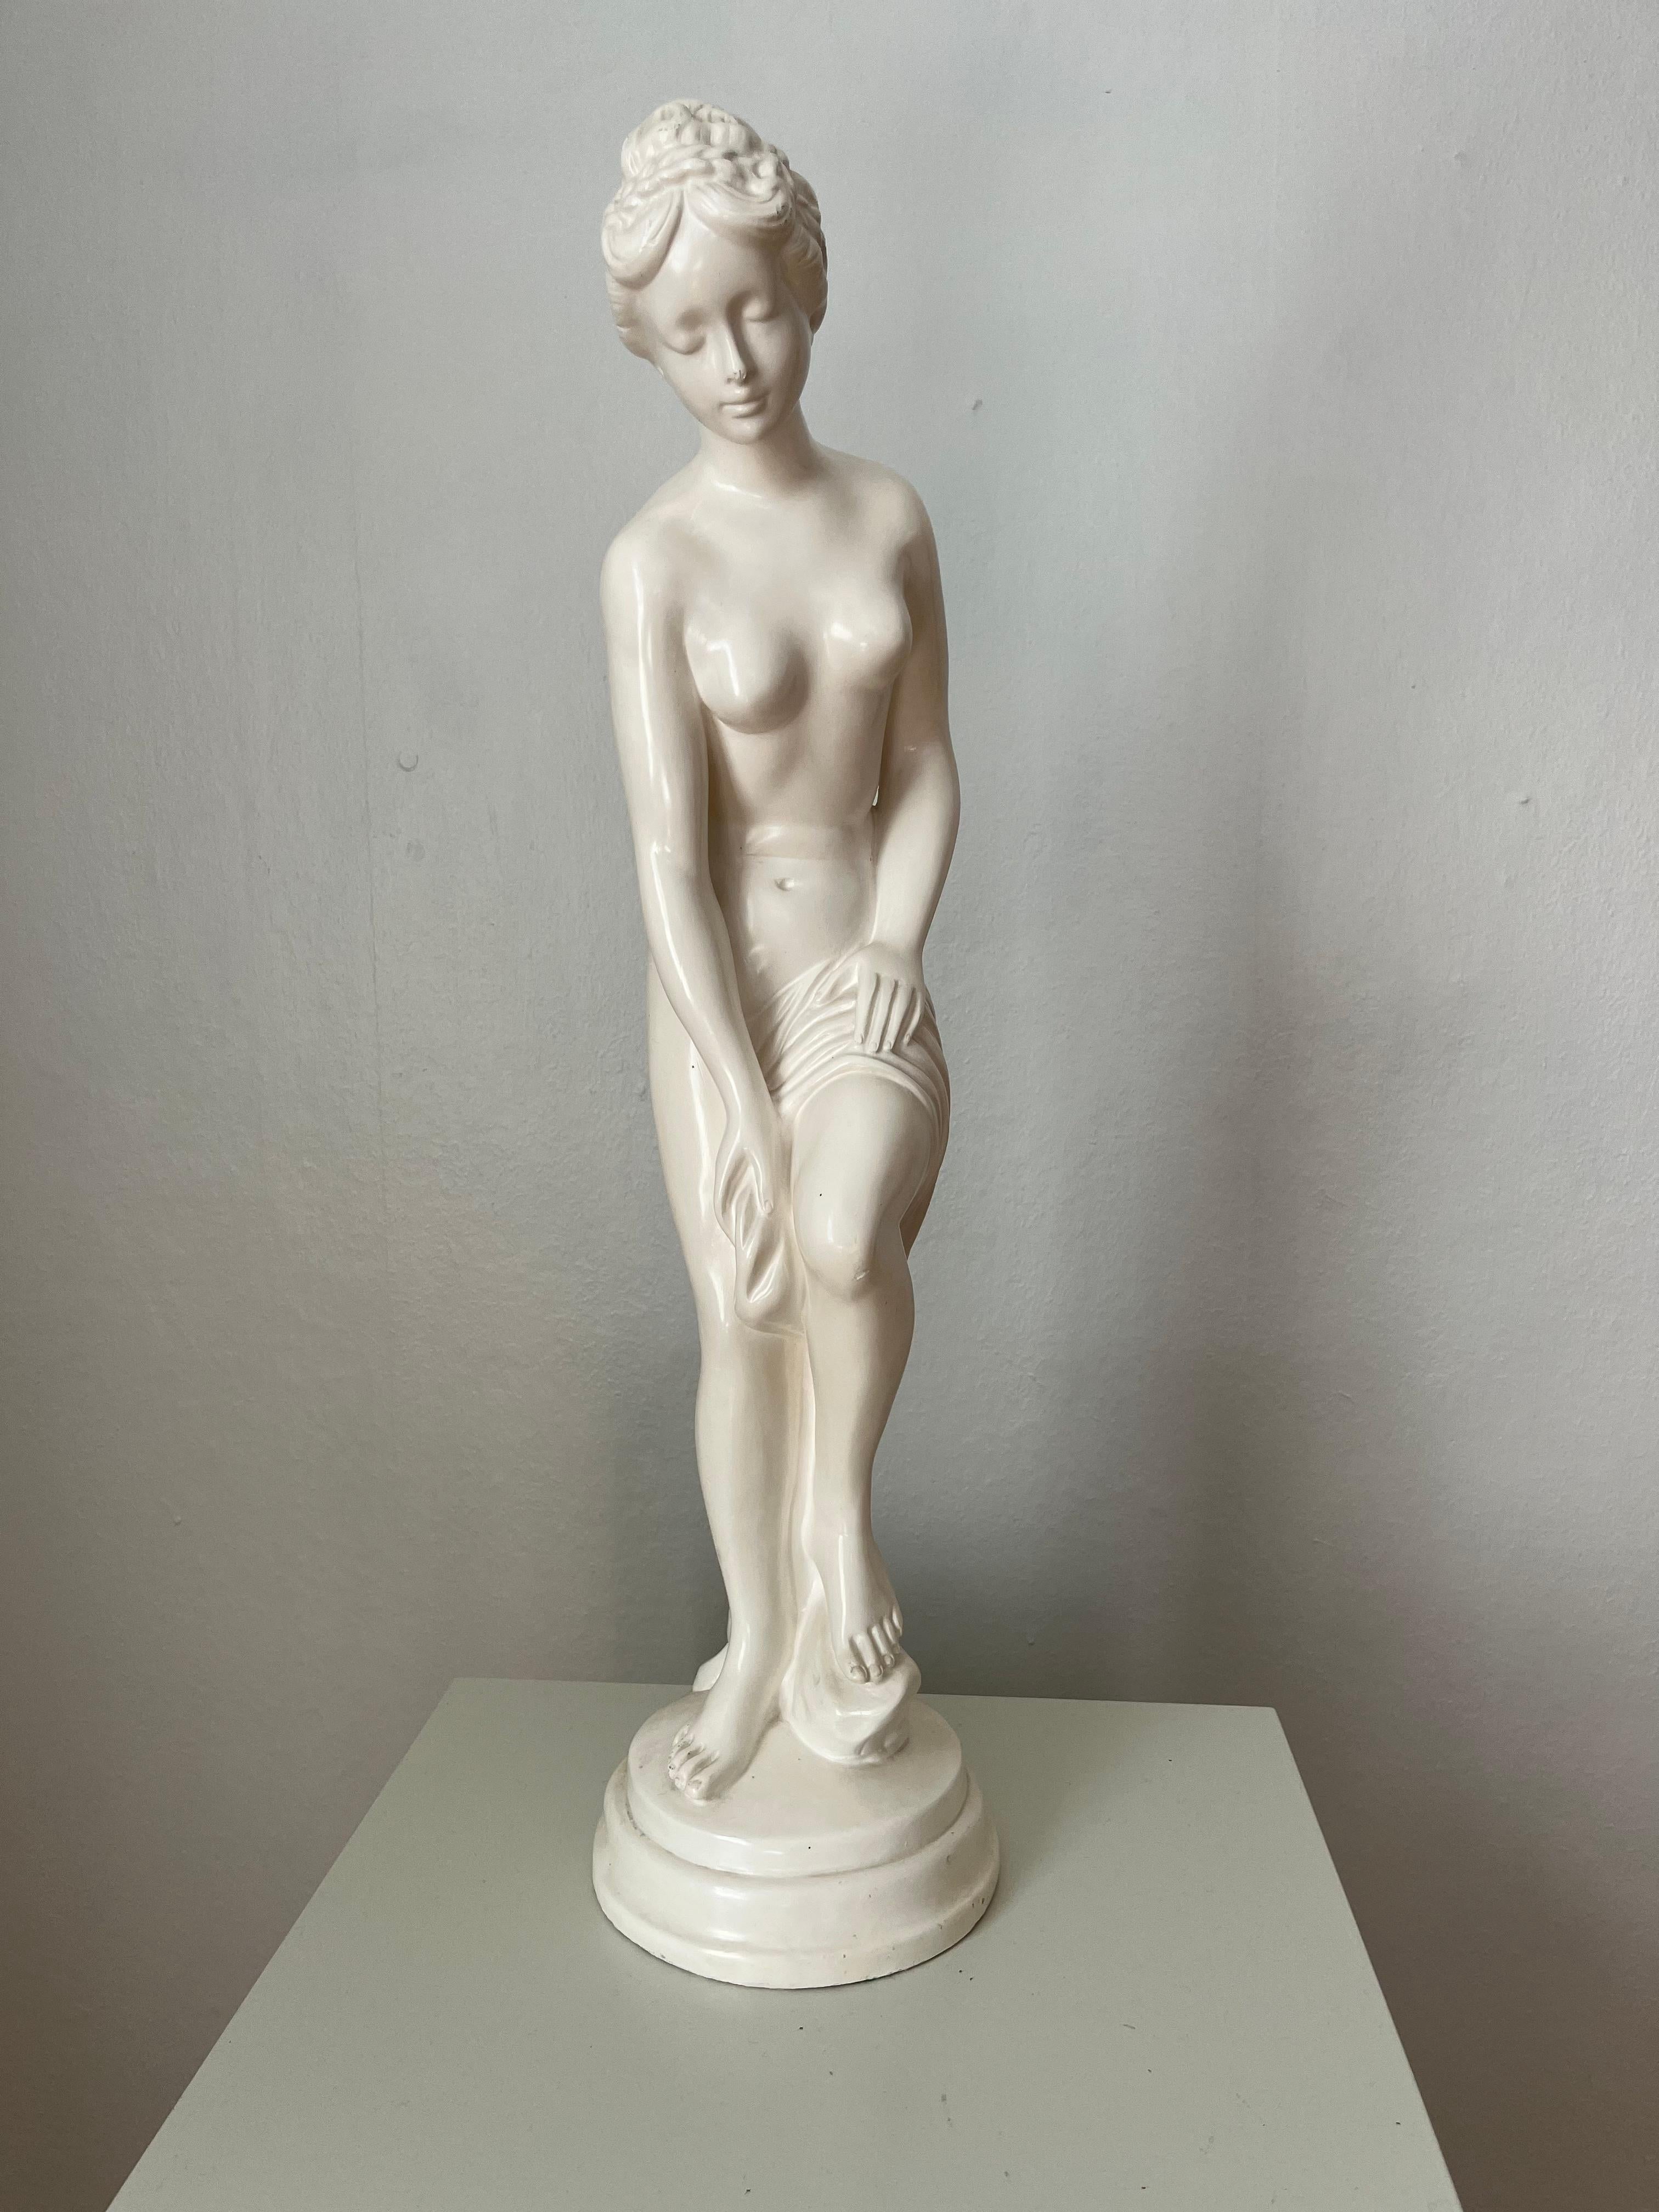 This Swedish decorative figurine in the shape of a standing woman is made of white plaster and made in the first half of the 20th century. 

Good vintage condition, few signs of age and wear and one small chip/loss in the glaze on the back, that has